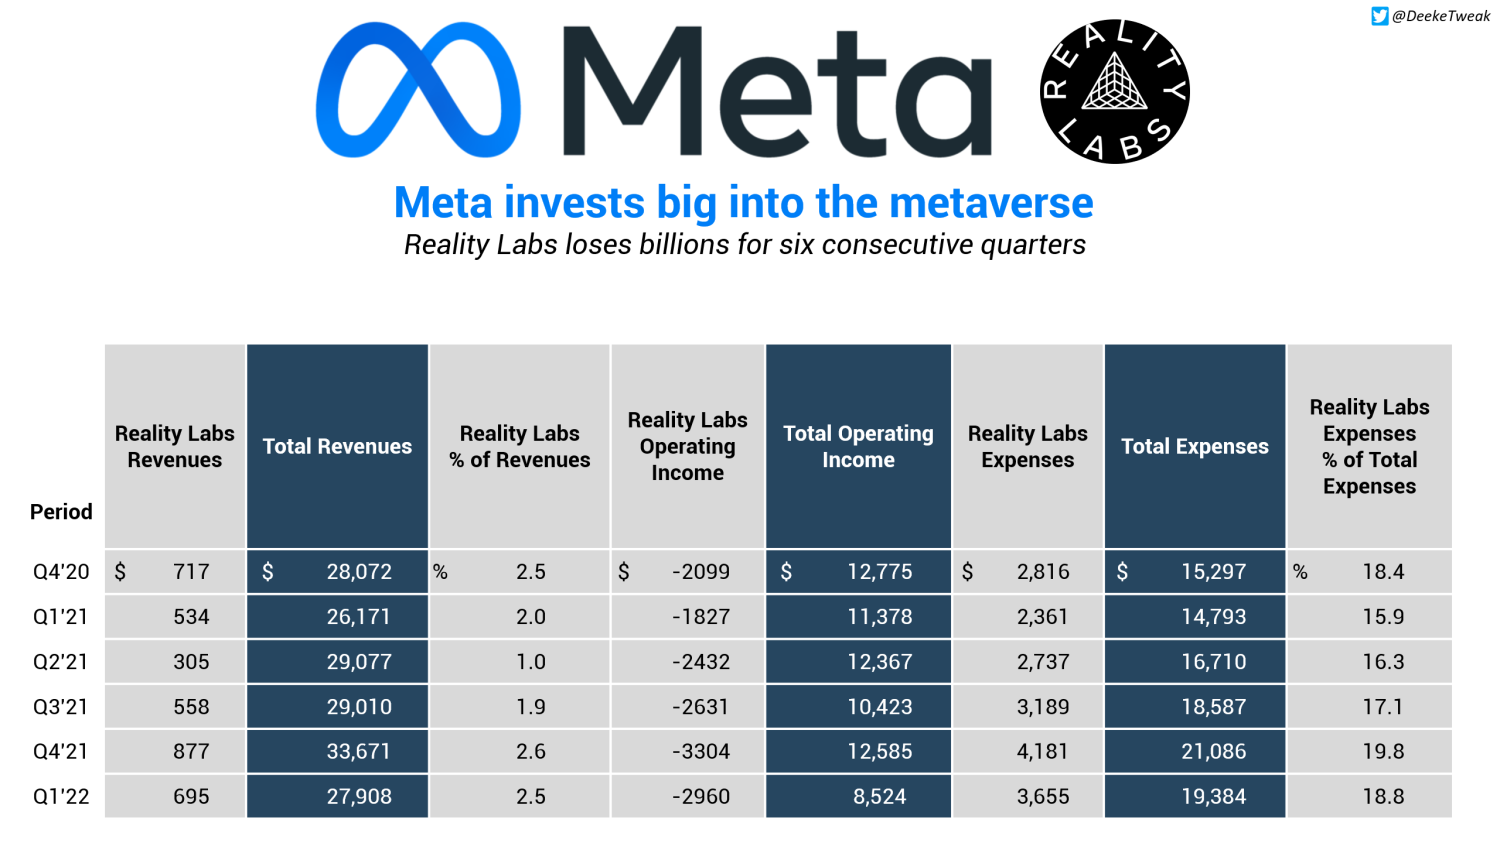 Meta lost $10 billion on VR in 2021, now raising Quest 2 price by $100